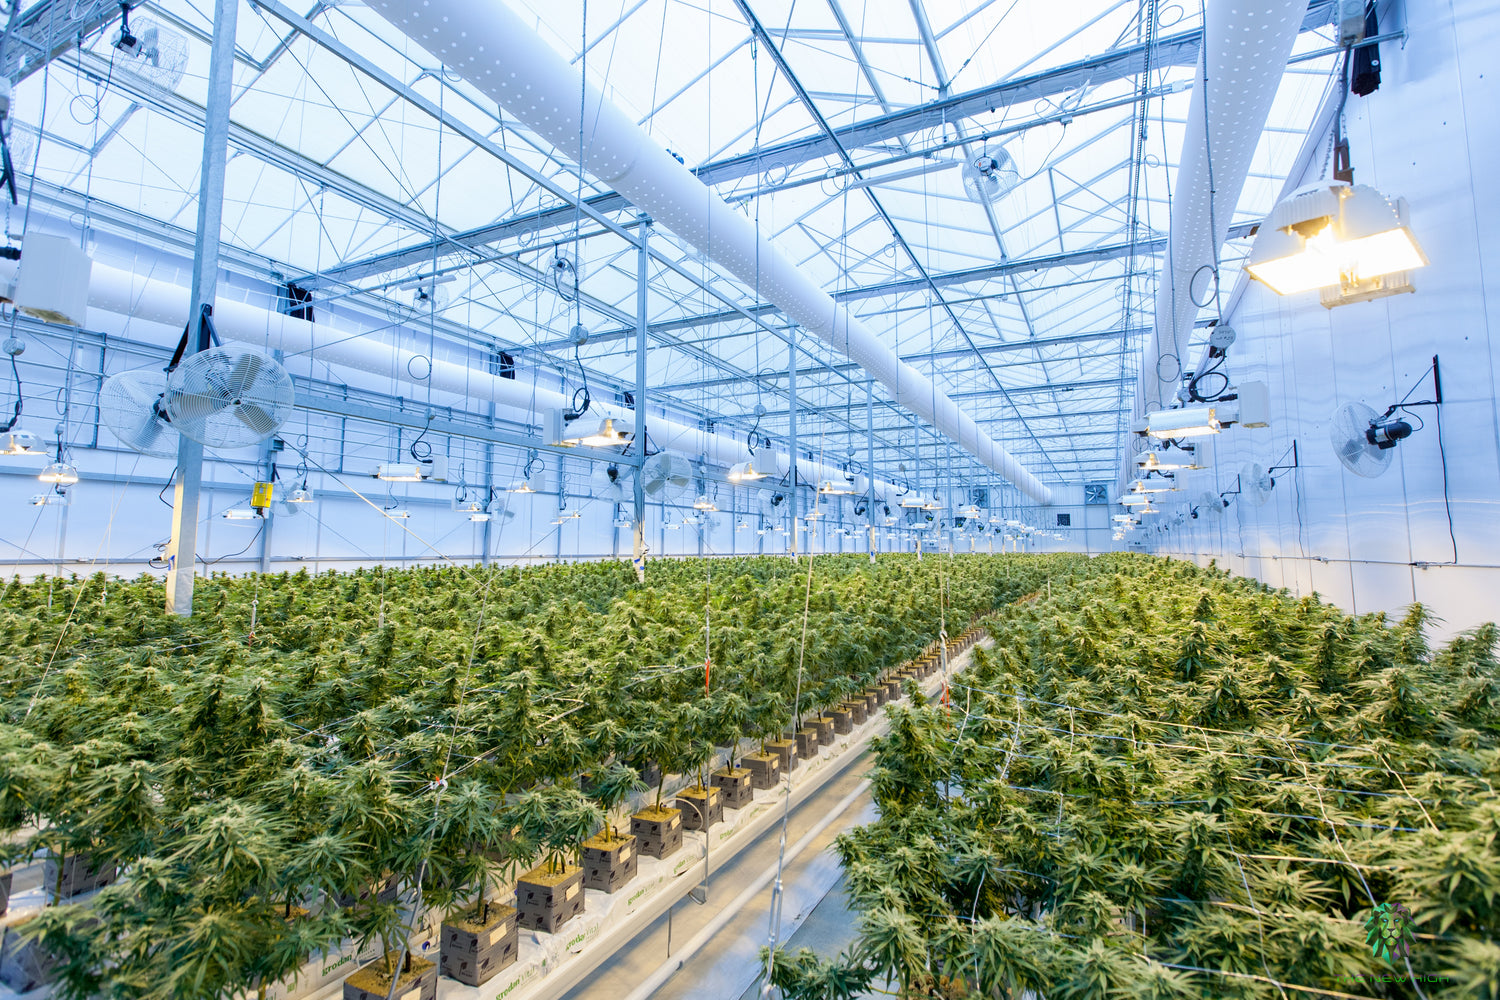 A large greenhouse with plants mentioned clean shop air.